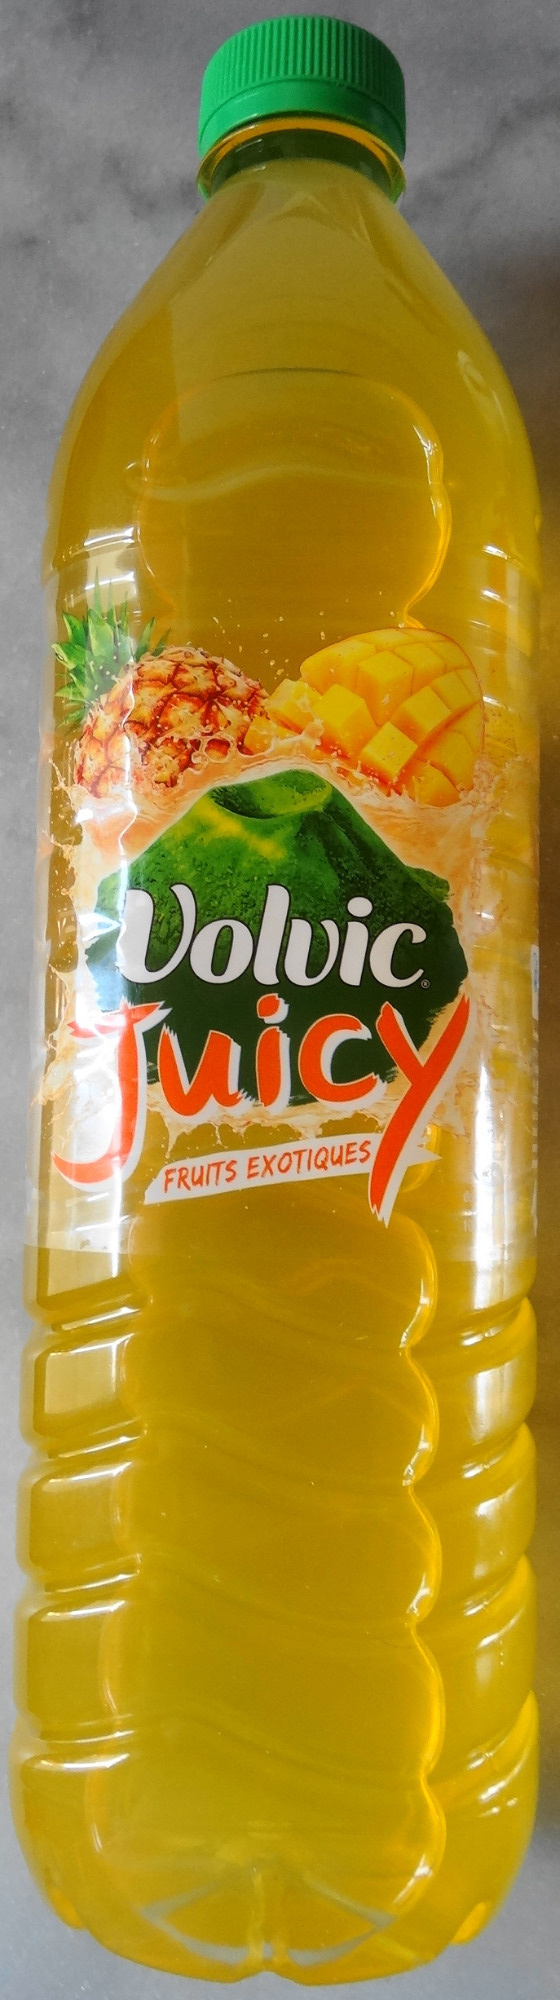 Juicy Fruits Exotiques - Product - fr